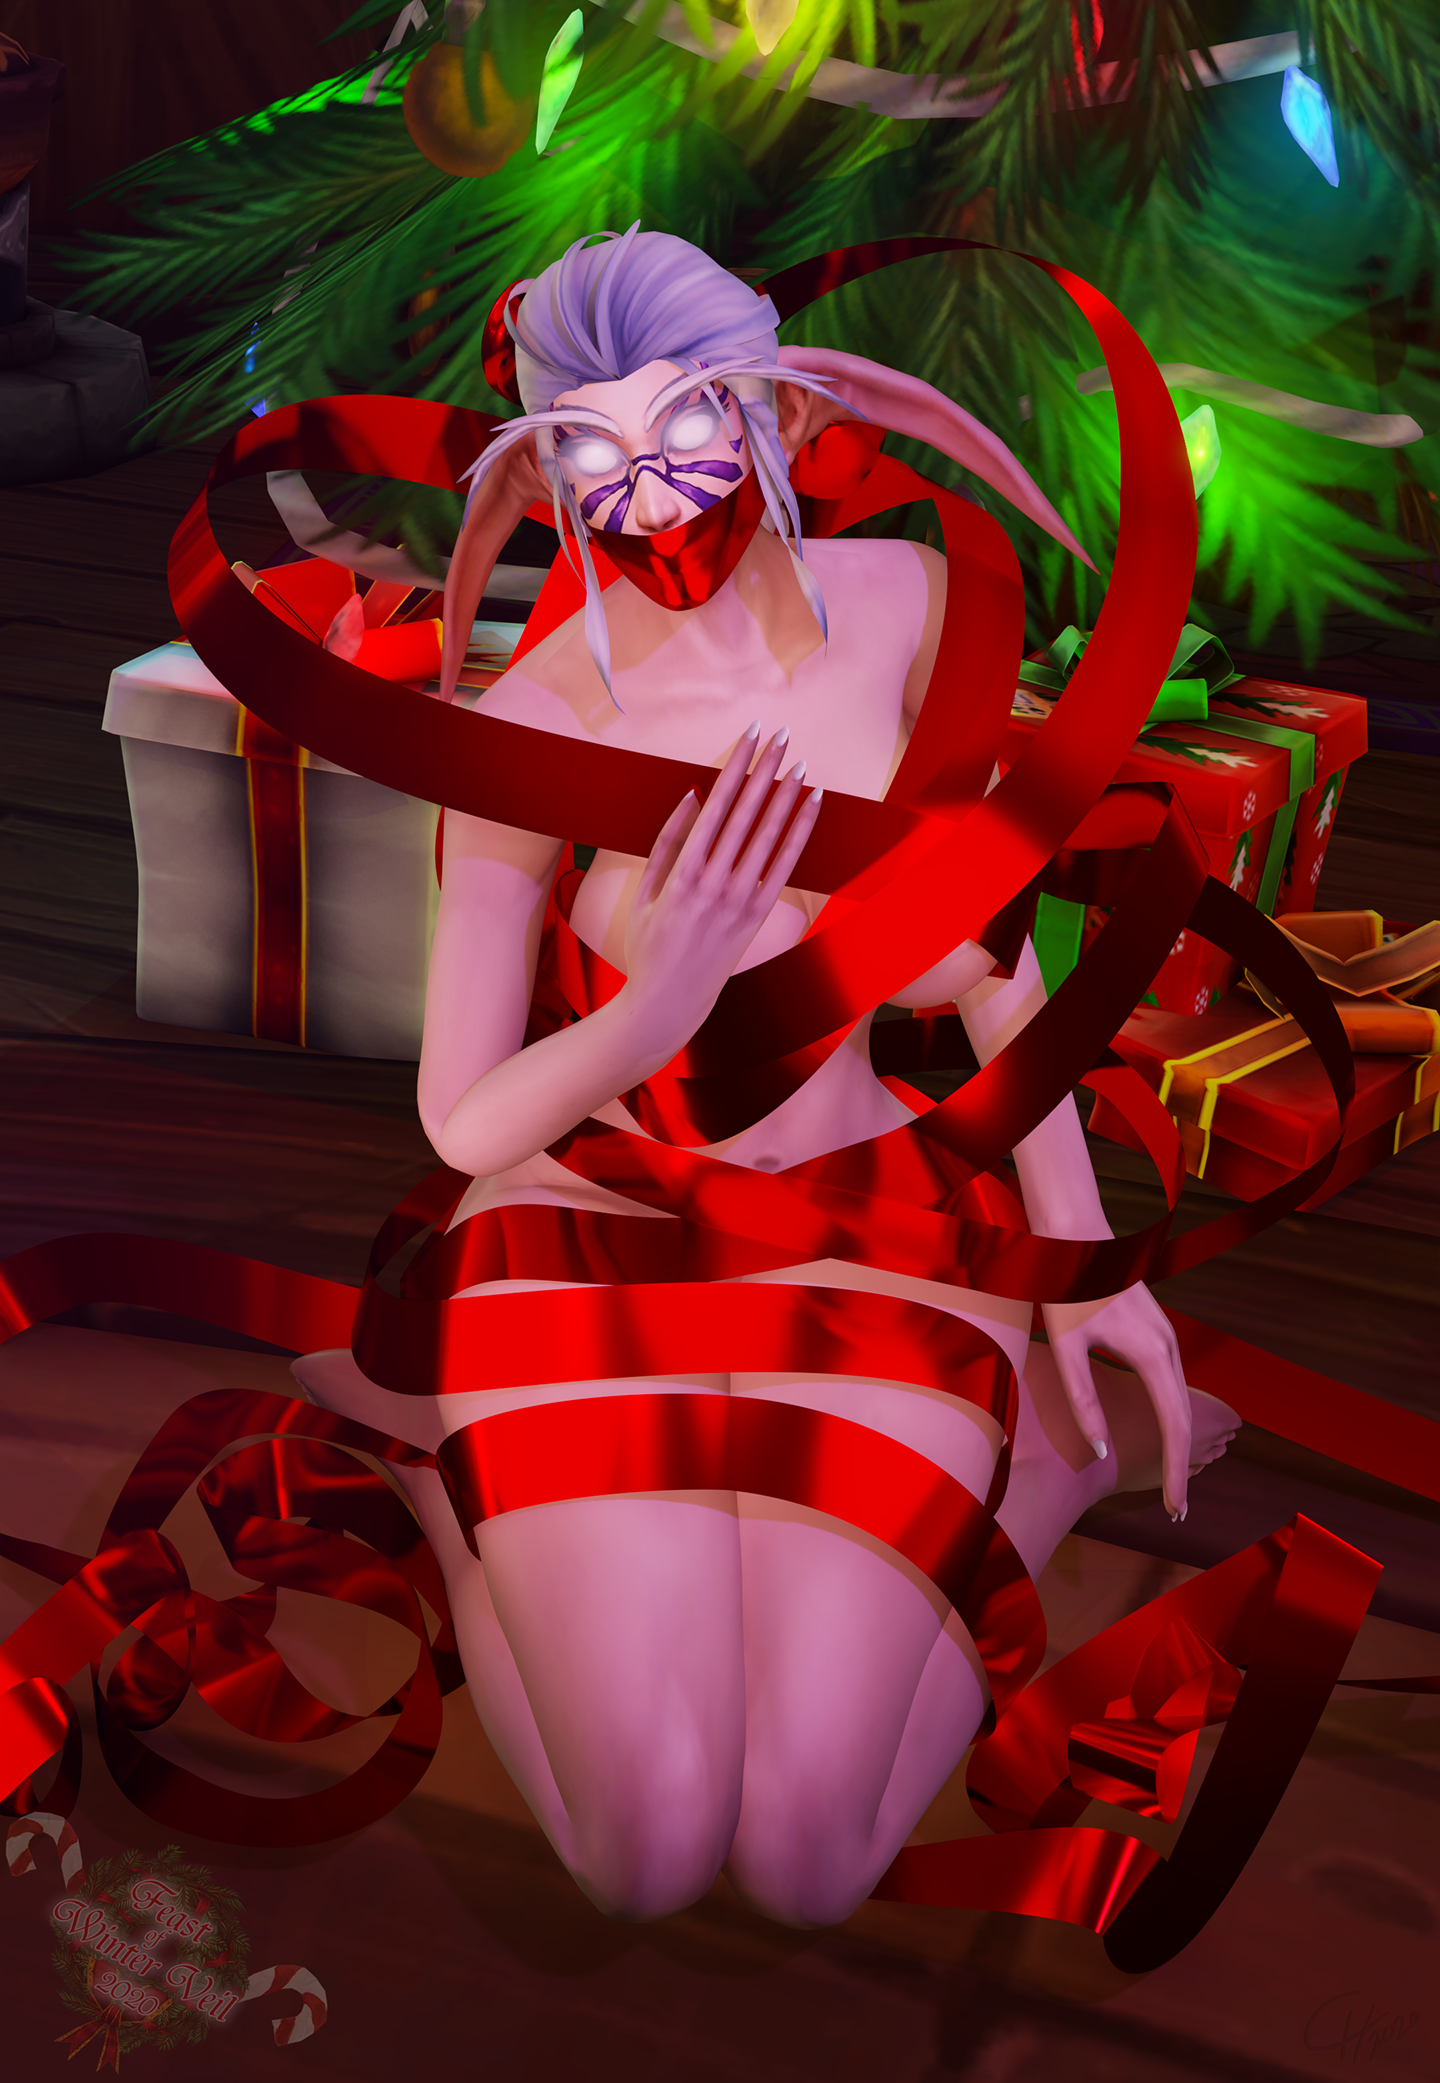 Winter Veil 2020: Gift Wrapped Elf [Nelf/Tease]
She couldn't think of anything to give
as Winter Veil gift, so she hopes this
suffices as one.
[b][url=http://bakaras.com/murlocish/albums/userpics/10001/10/2020XmasPic2XL.png]==XL-Size Edit==[/url][/b]
Keywords: Nelf;OC;Pinup;Tease;bondage;BDSM